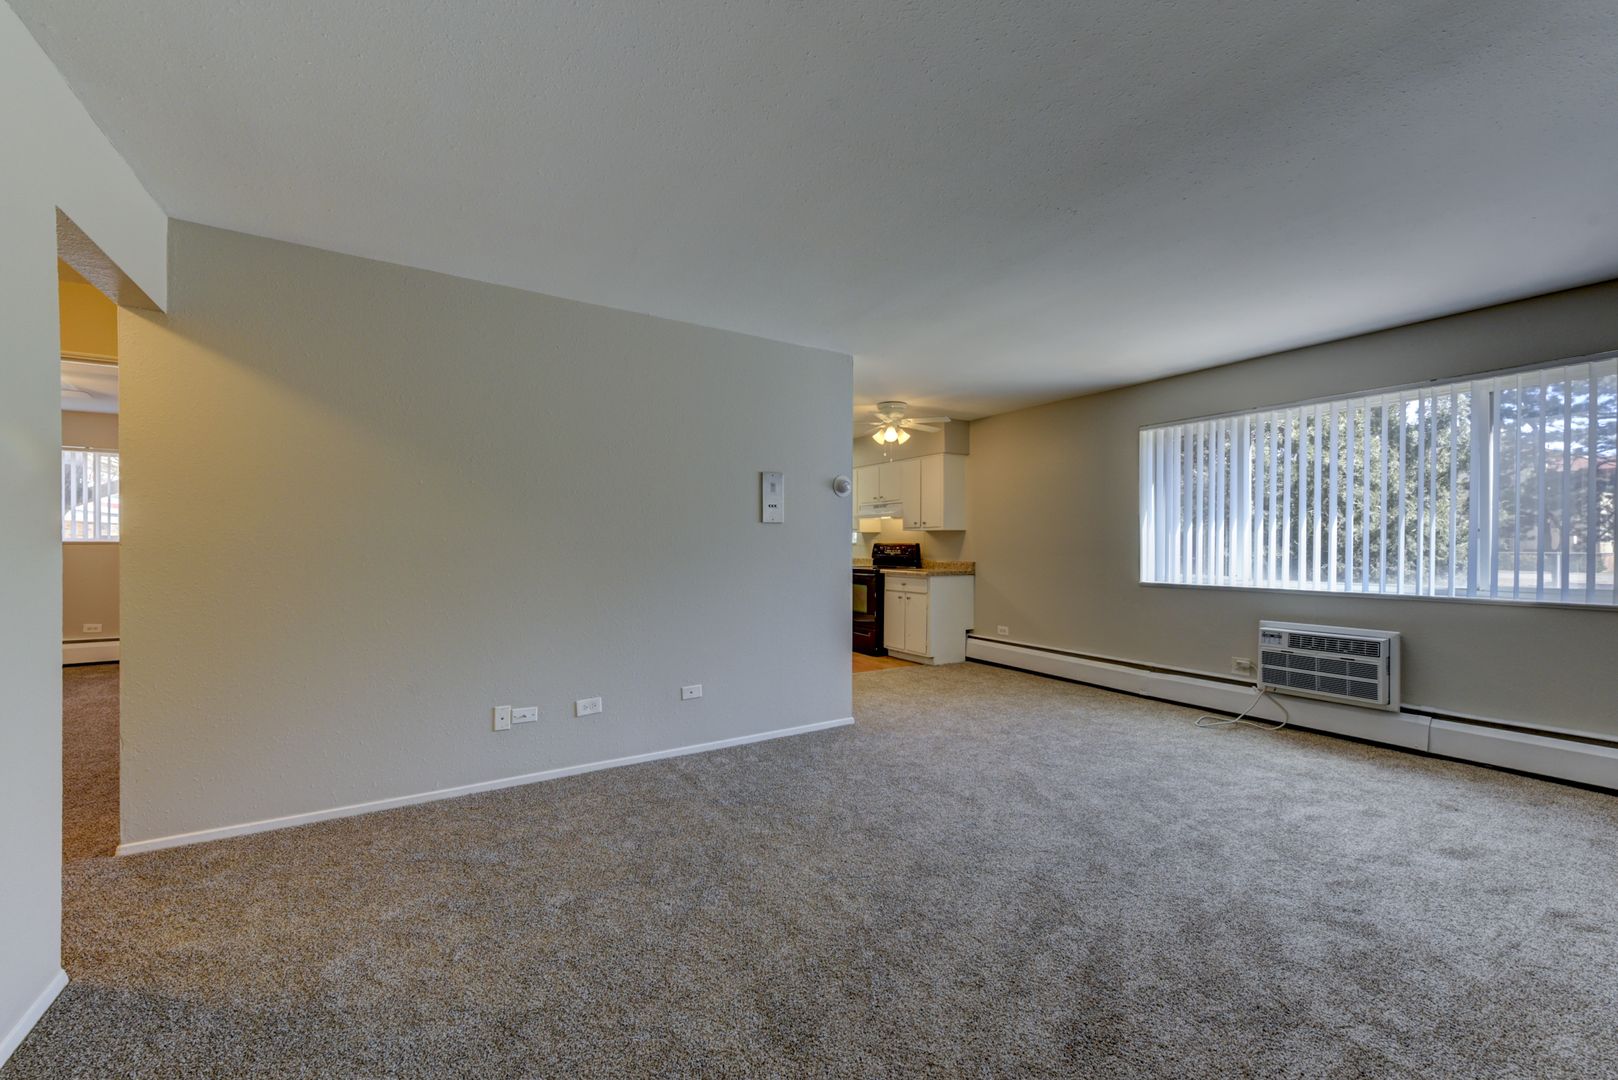 RENT SPECIALS! Spacious 2 bedroom close to Anschutz Medical School, SHOPPING and MORE!